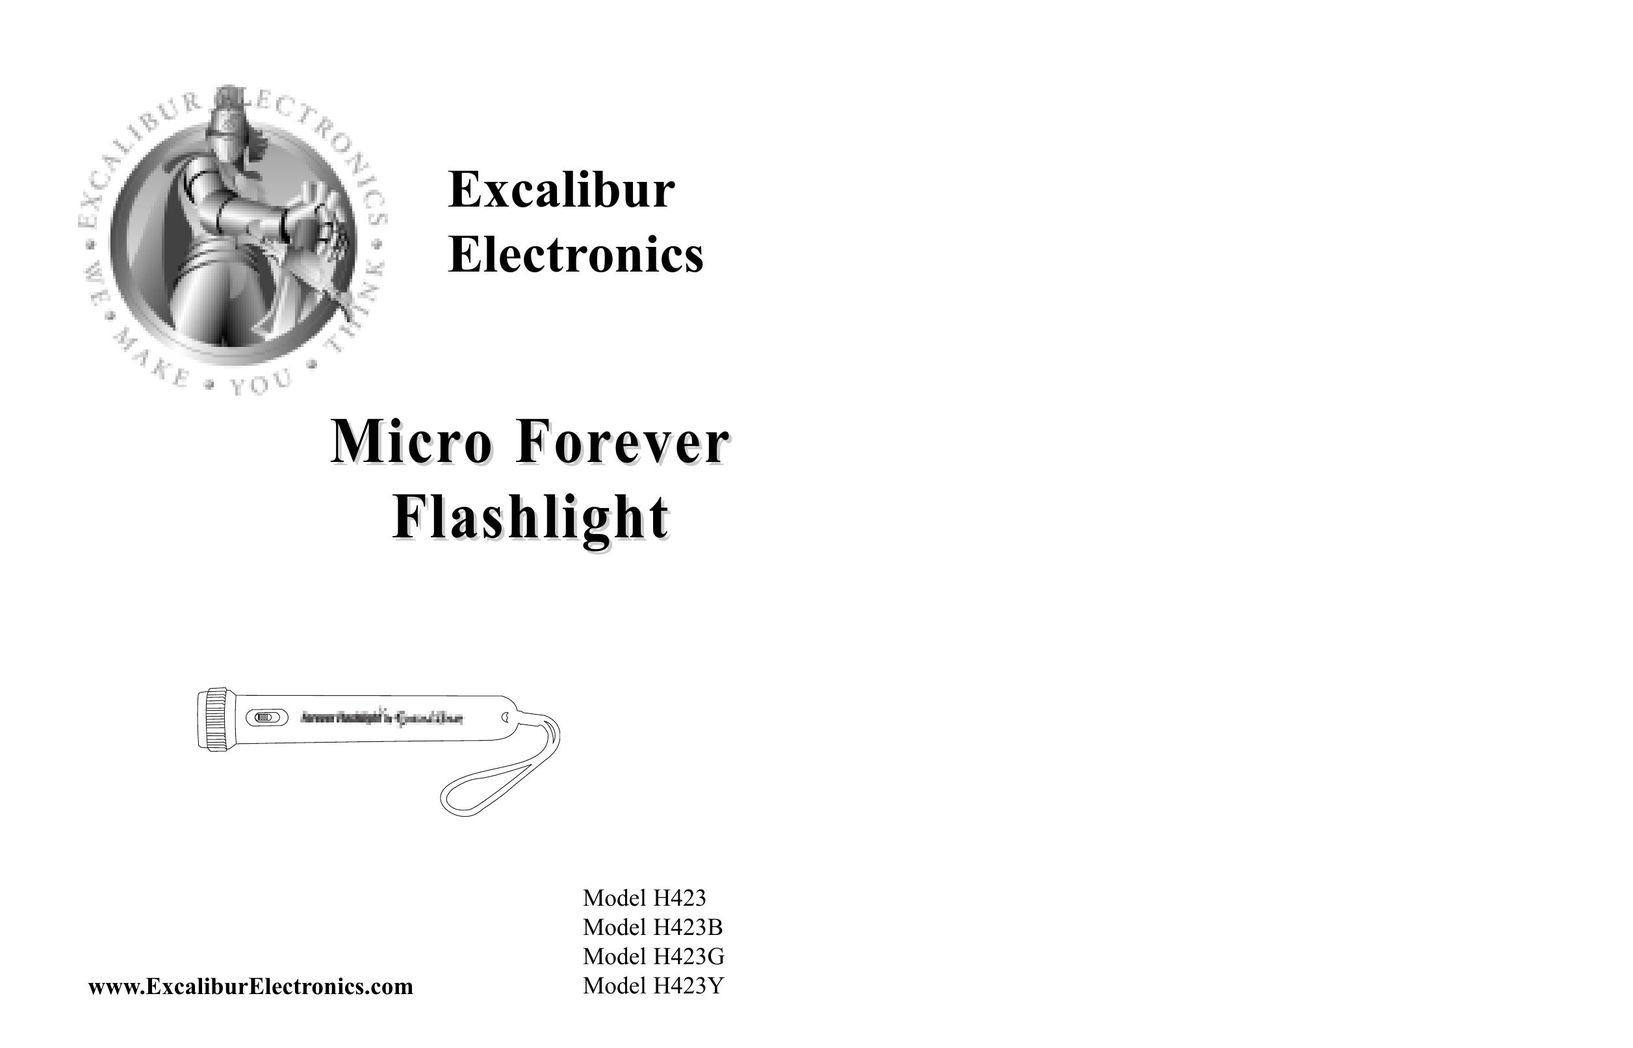 Excalibur electronic H423 Home Safety Product User Manual